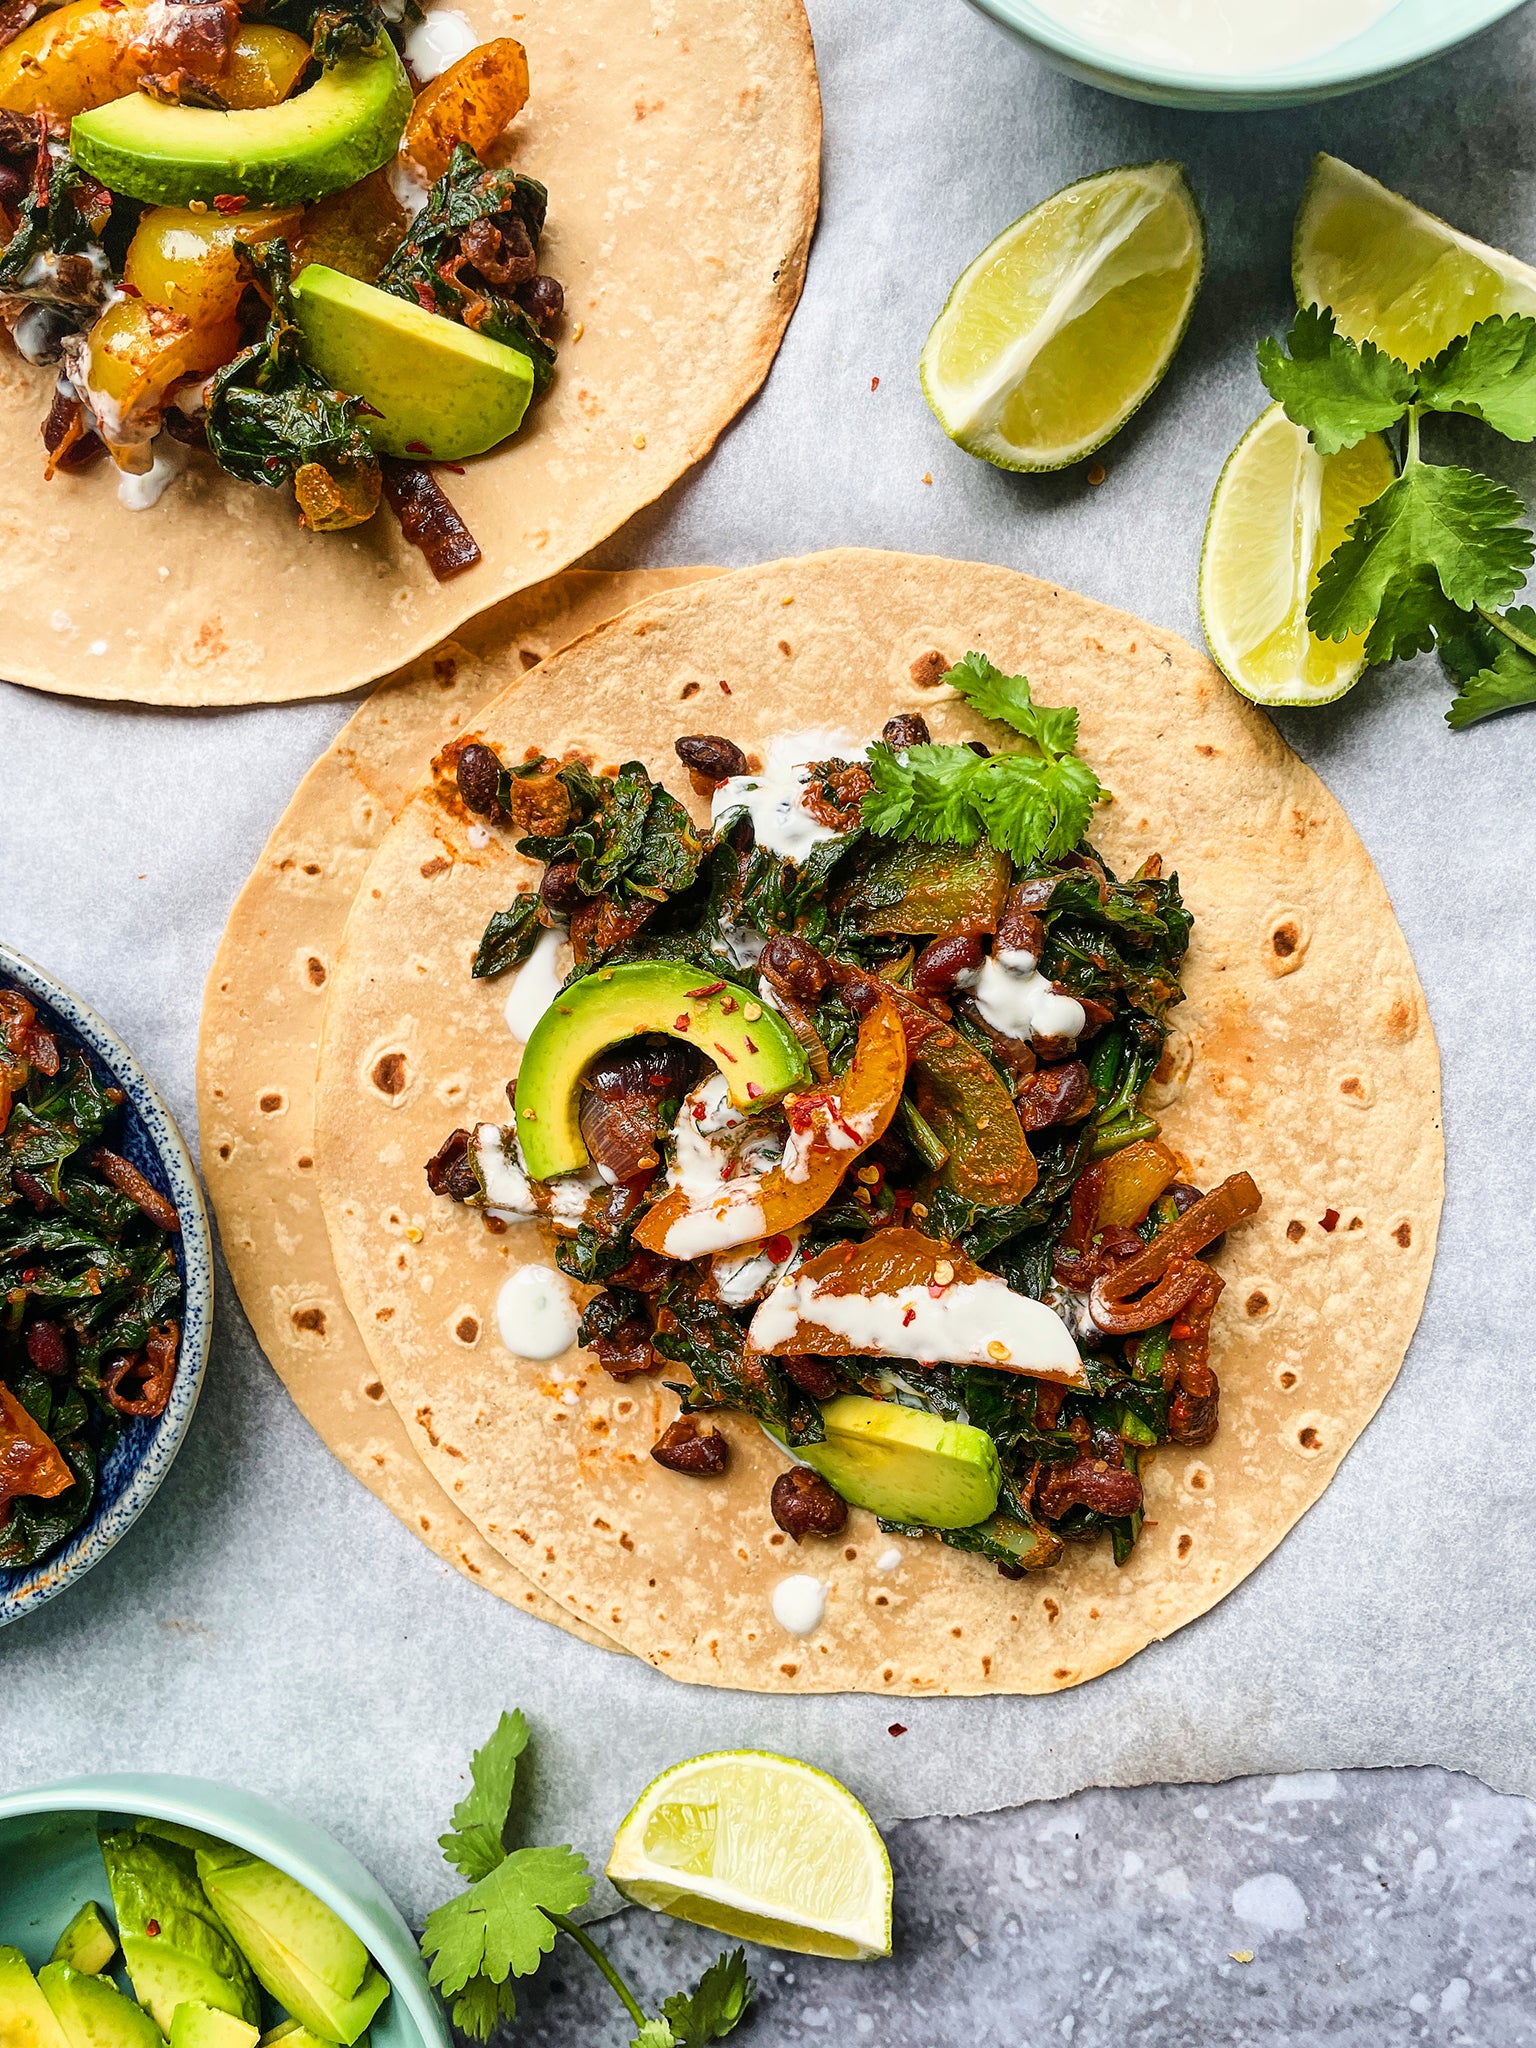 Made with black beans and juicy avocados, these fajitas are suitable for vegetarians and a source of fibre and protein